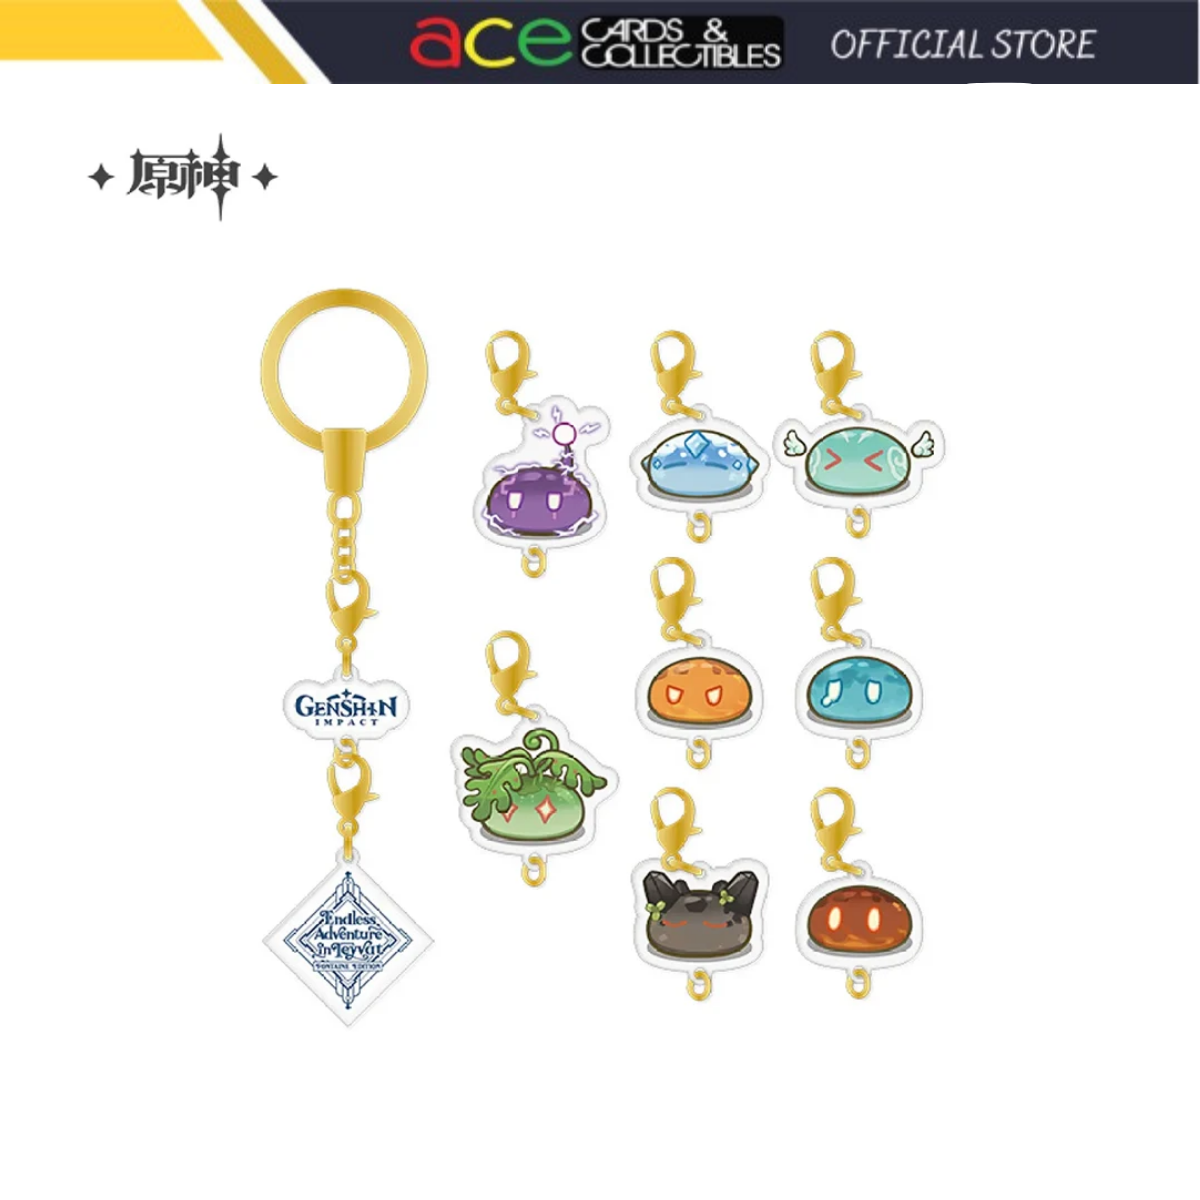 miHoYo Genshin Impact Game Art Exhibition 2023: Slime Acrylic Ornament String-miHoYo-Ace Cards & Collectibles